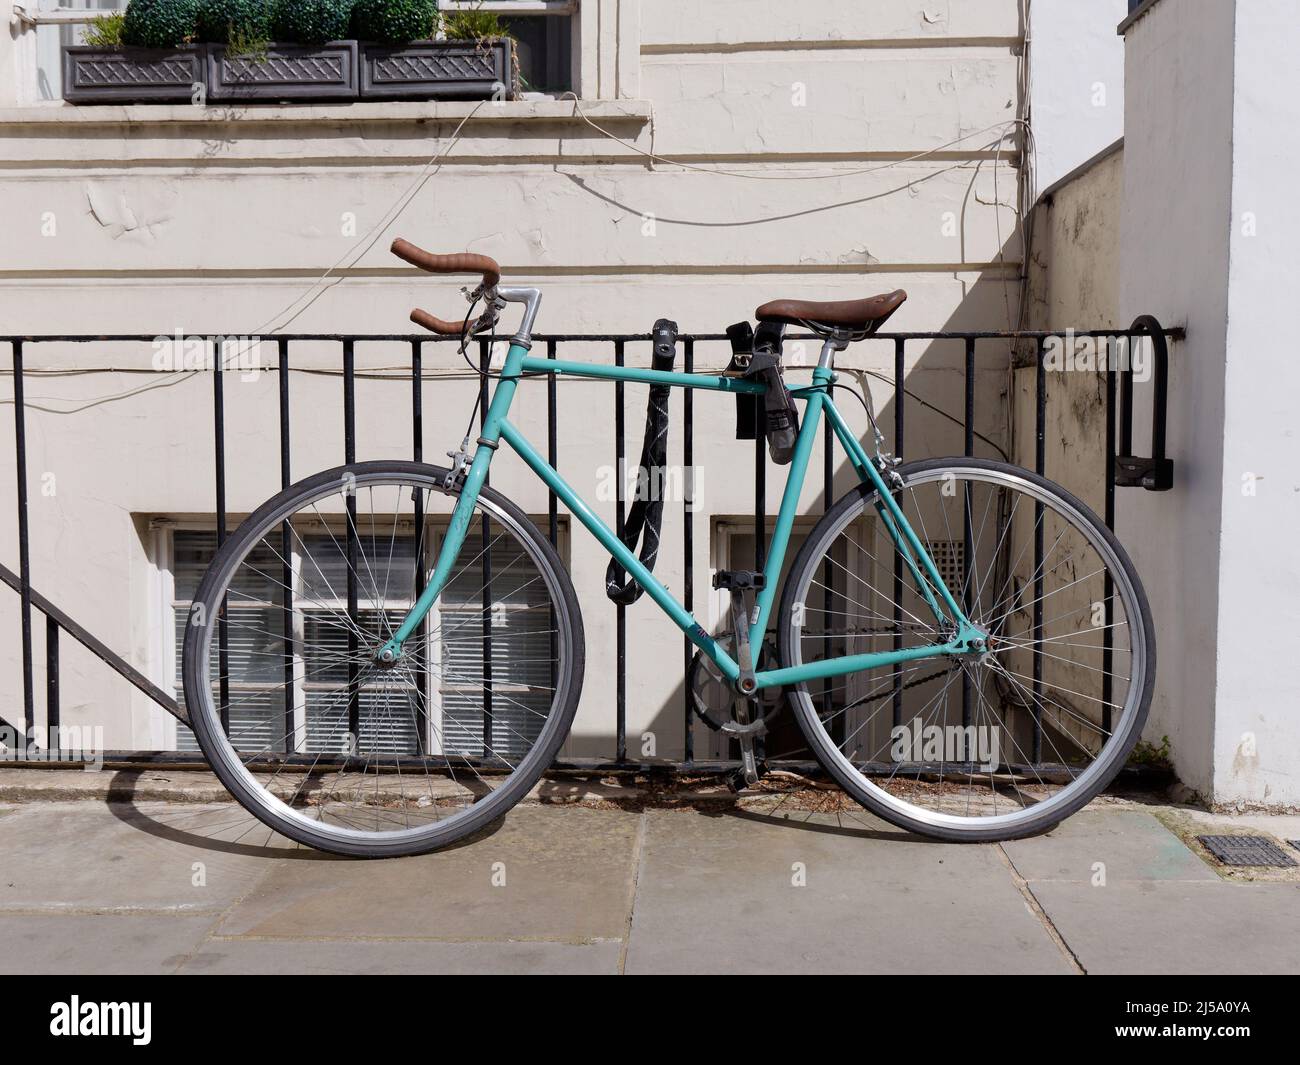 London, Greater London, England, April 09 2022: Pale blue cycle with brown seat and handle bars chained to railings of a house. Stock Photo